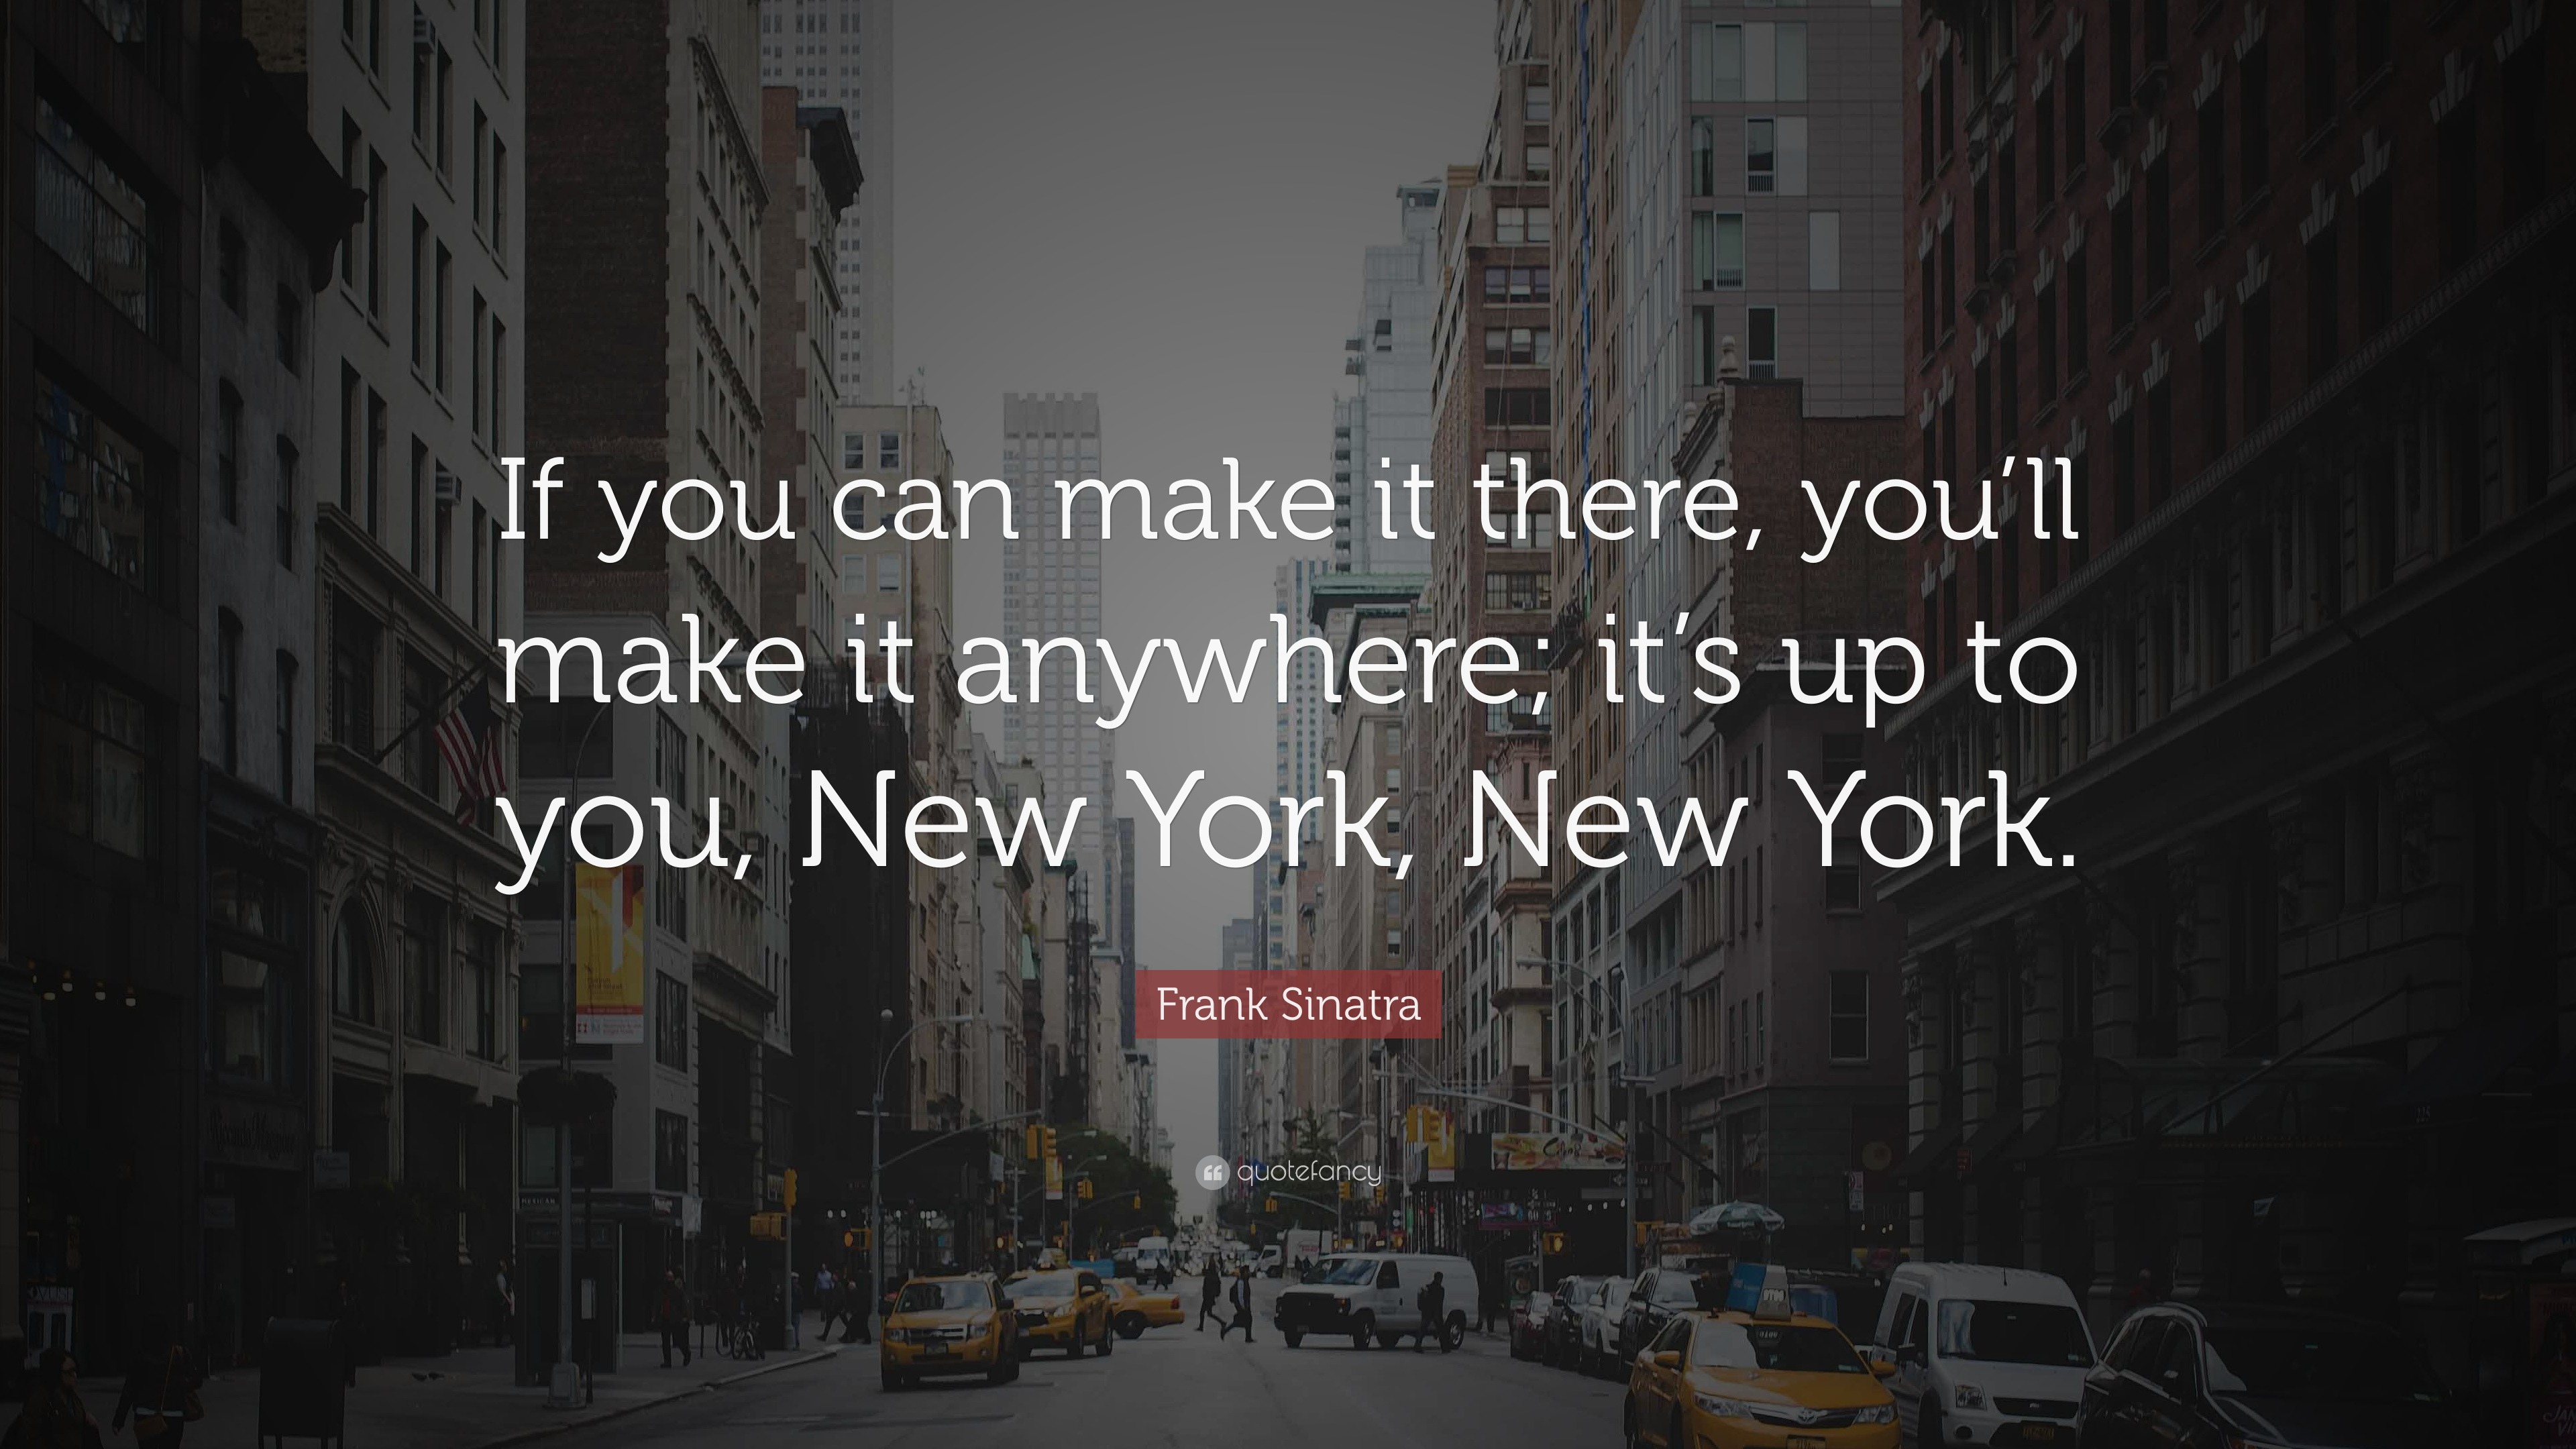 Frank Sinatra Quote: “If you can make it there, you’ll make it anywhere